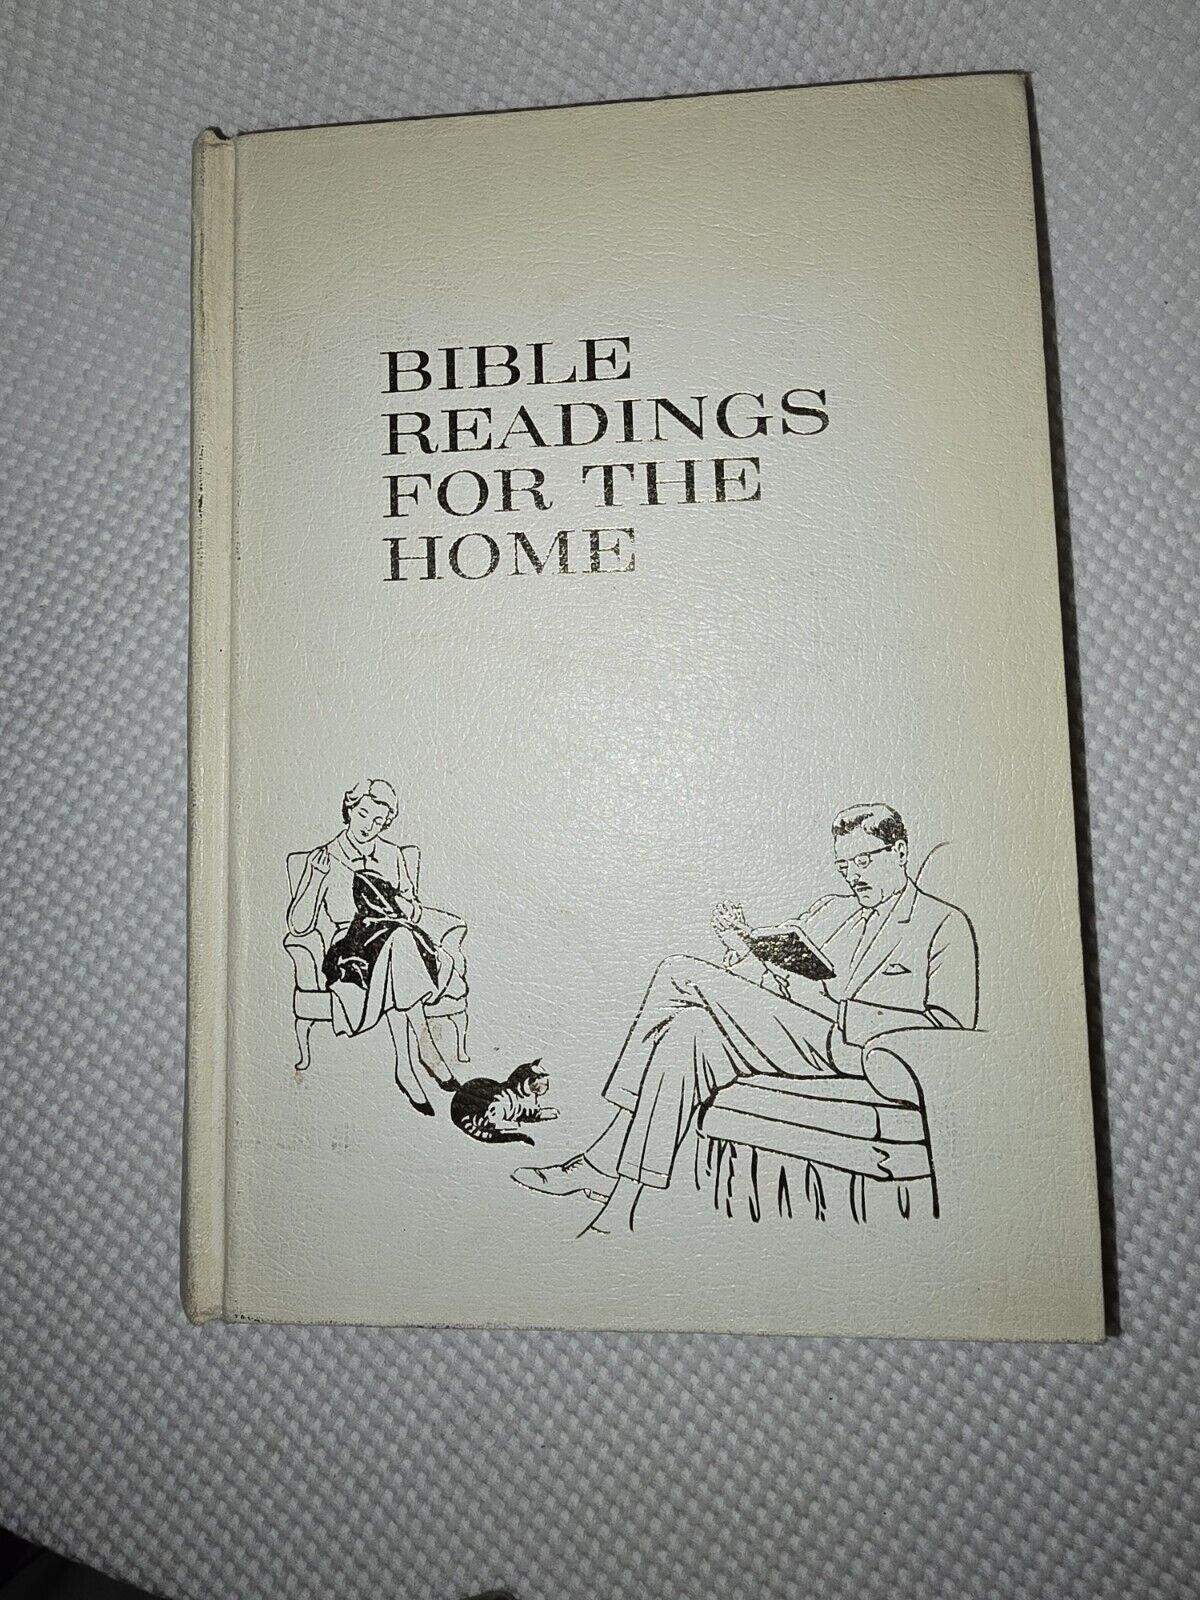 1962 Vintage Bible Readings for the Home  Edition HB Illustrated in Color